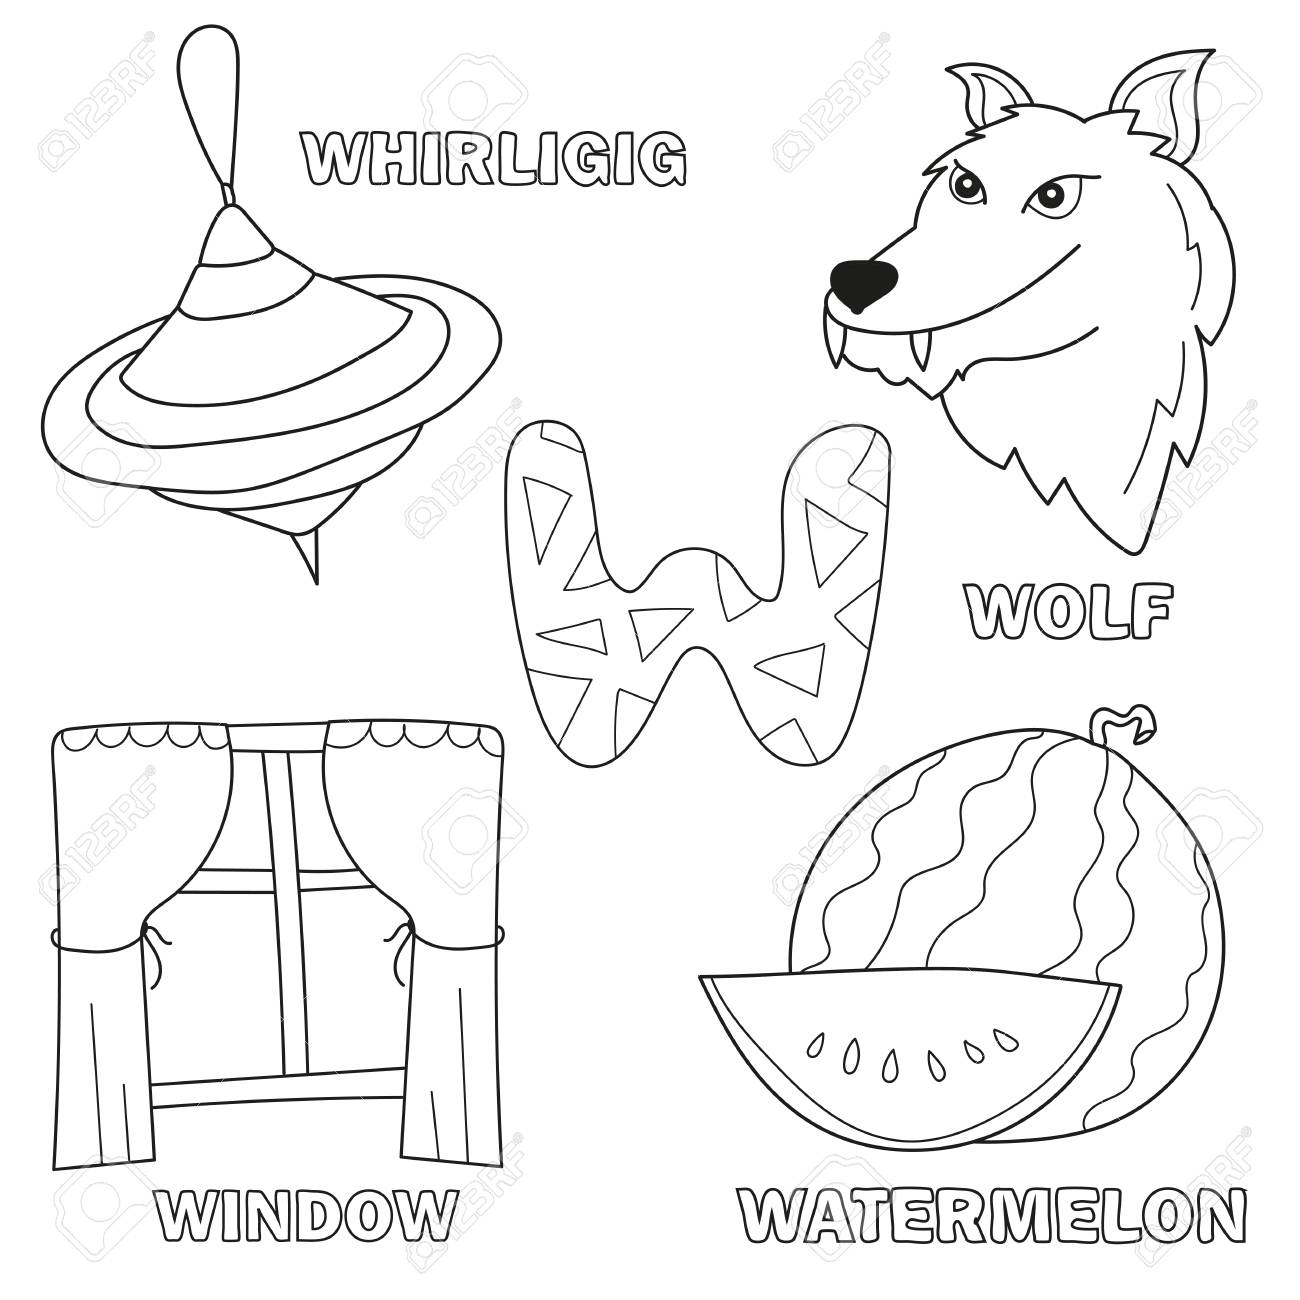 Black And White Cartoon Vector Illustration Of Letter W Worksheet.. with regard to Letter W Worksheets For Preschool